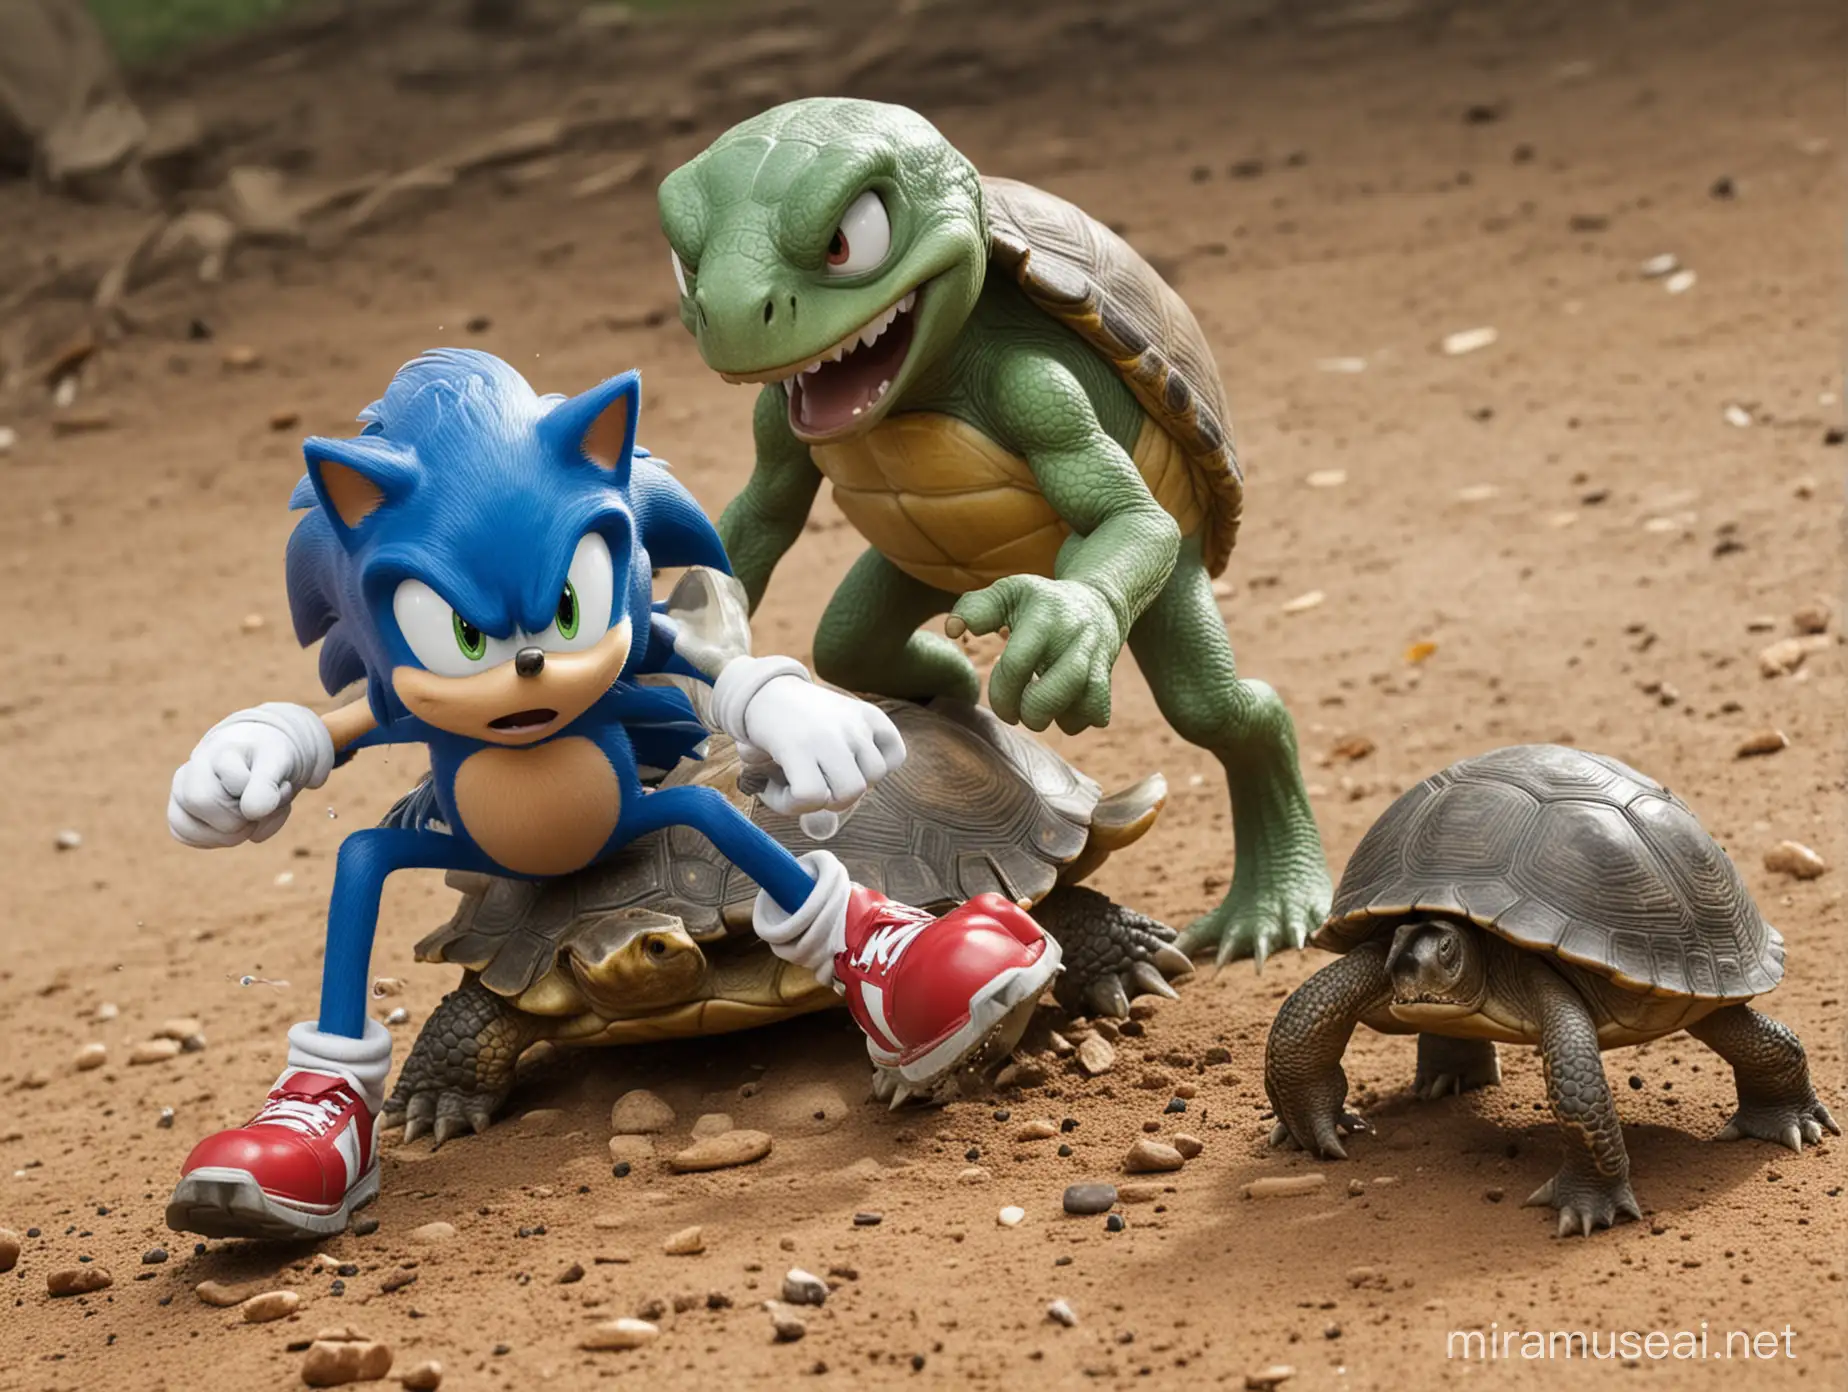 Sonic fighting a turtle
